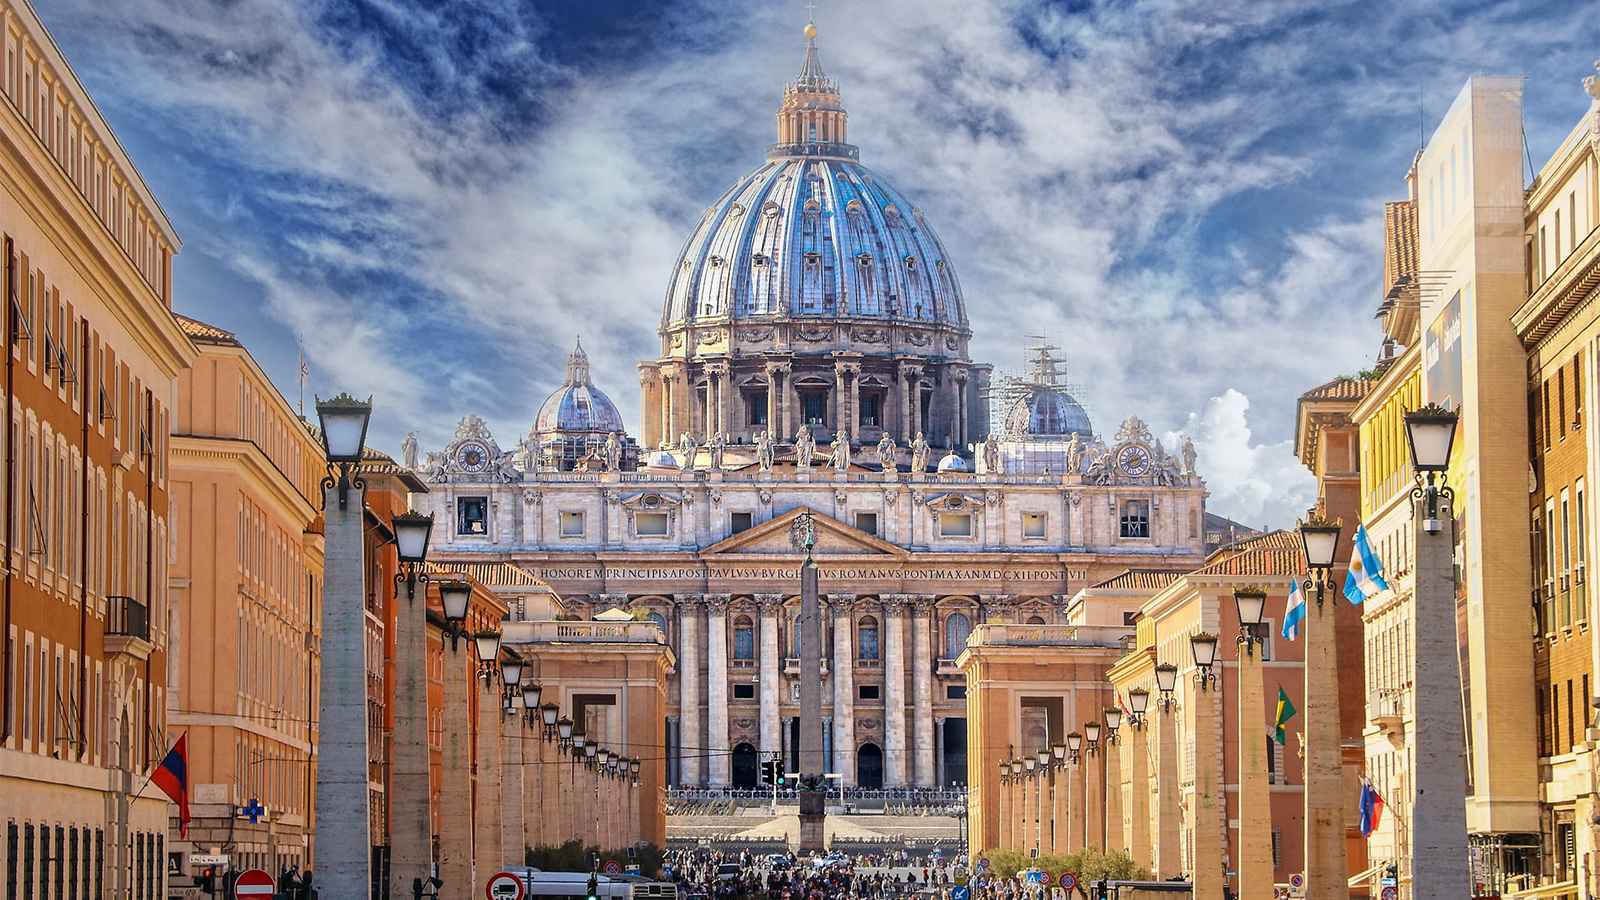 St Peters Day 2023: Date, History, Facts about St Peter